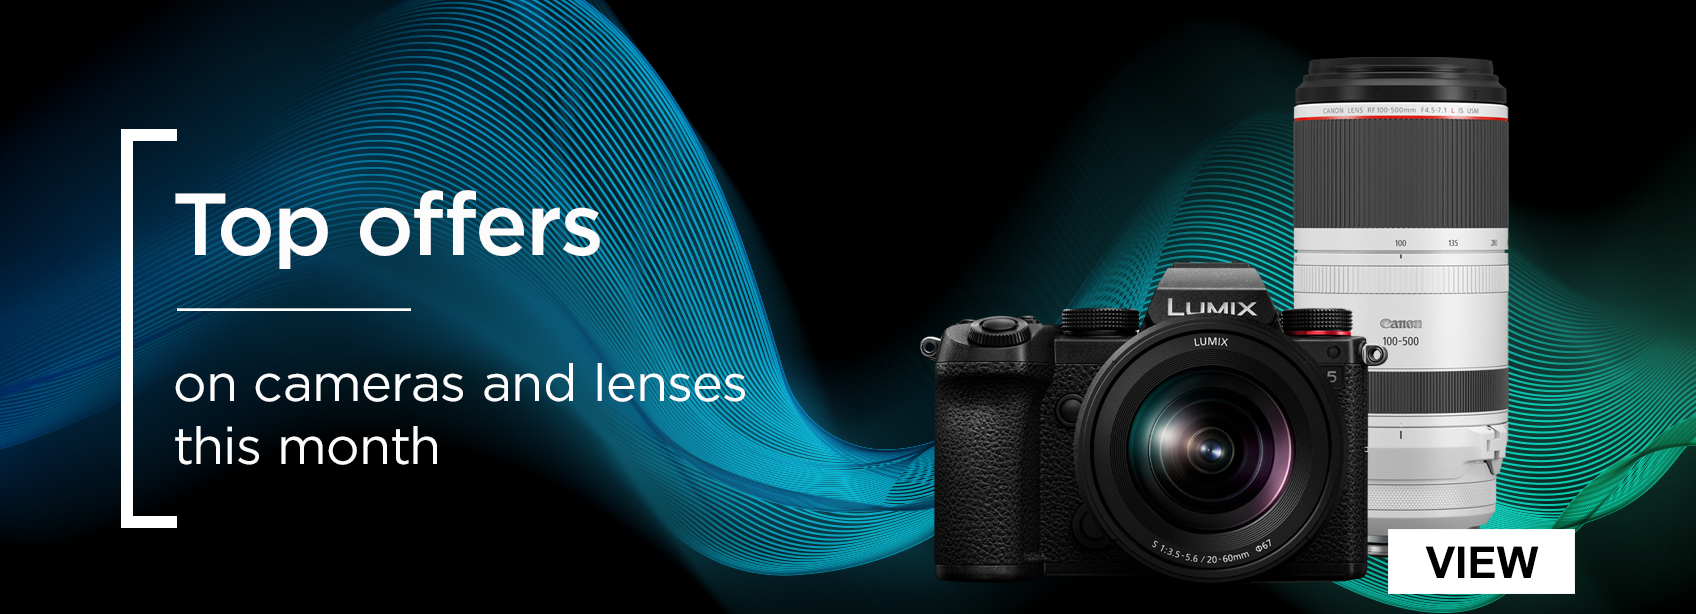 Top offers on cameras and lenses this month